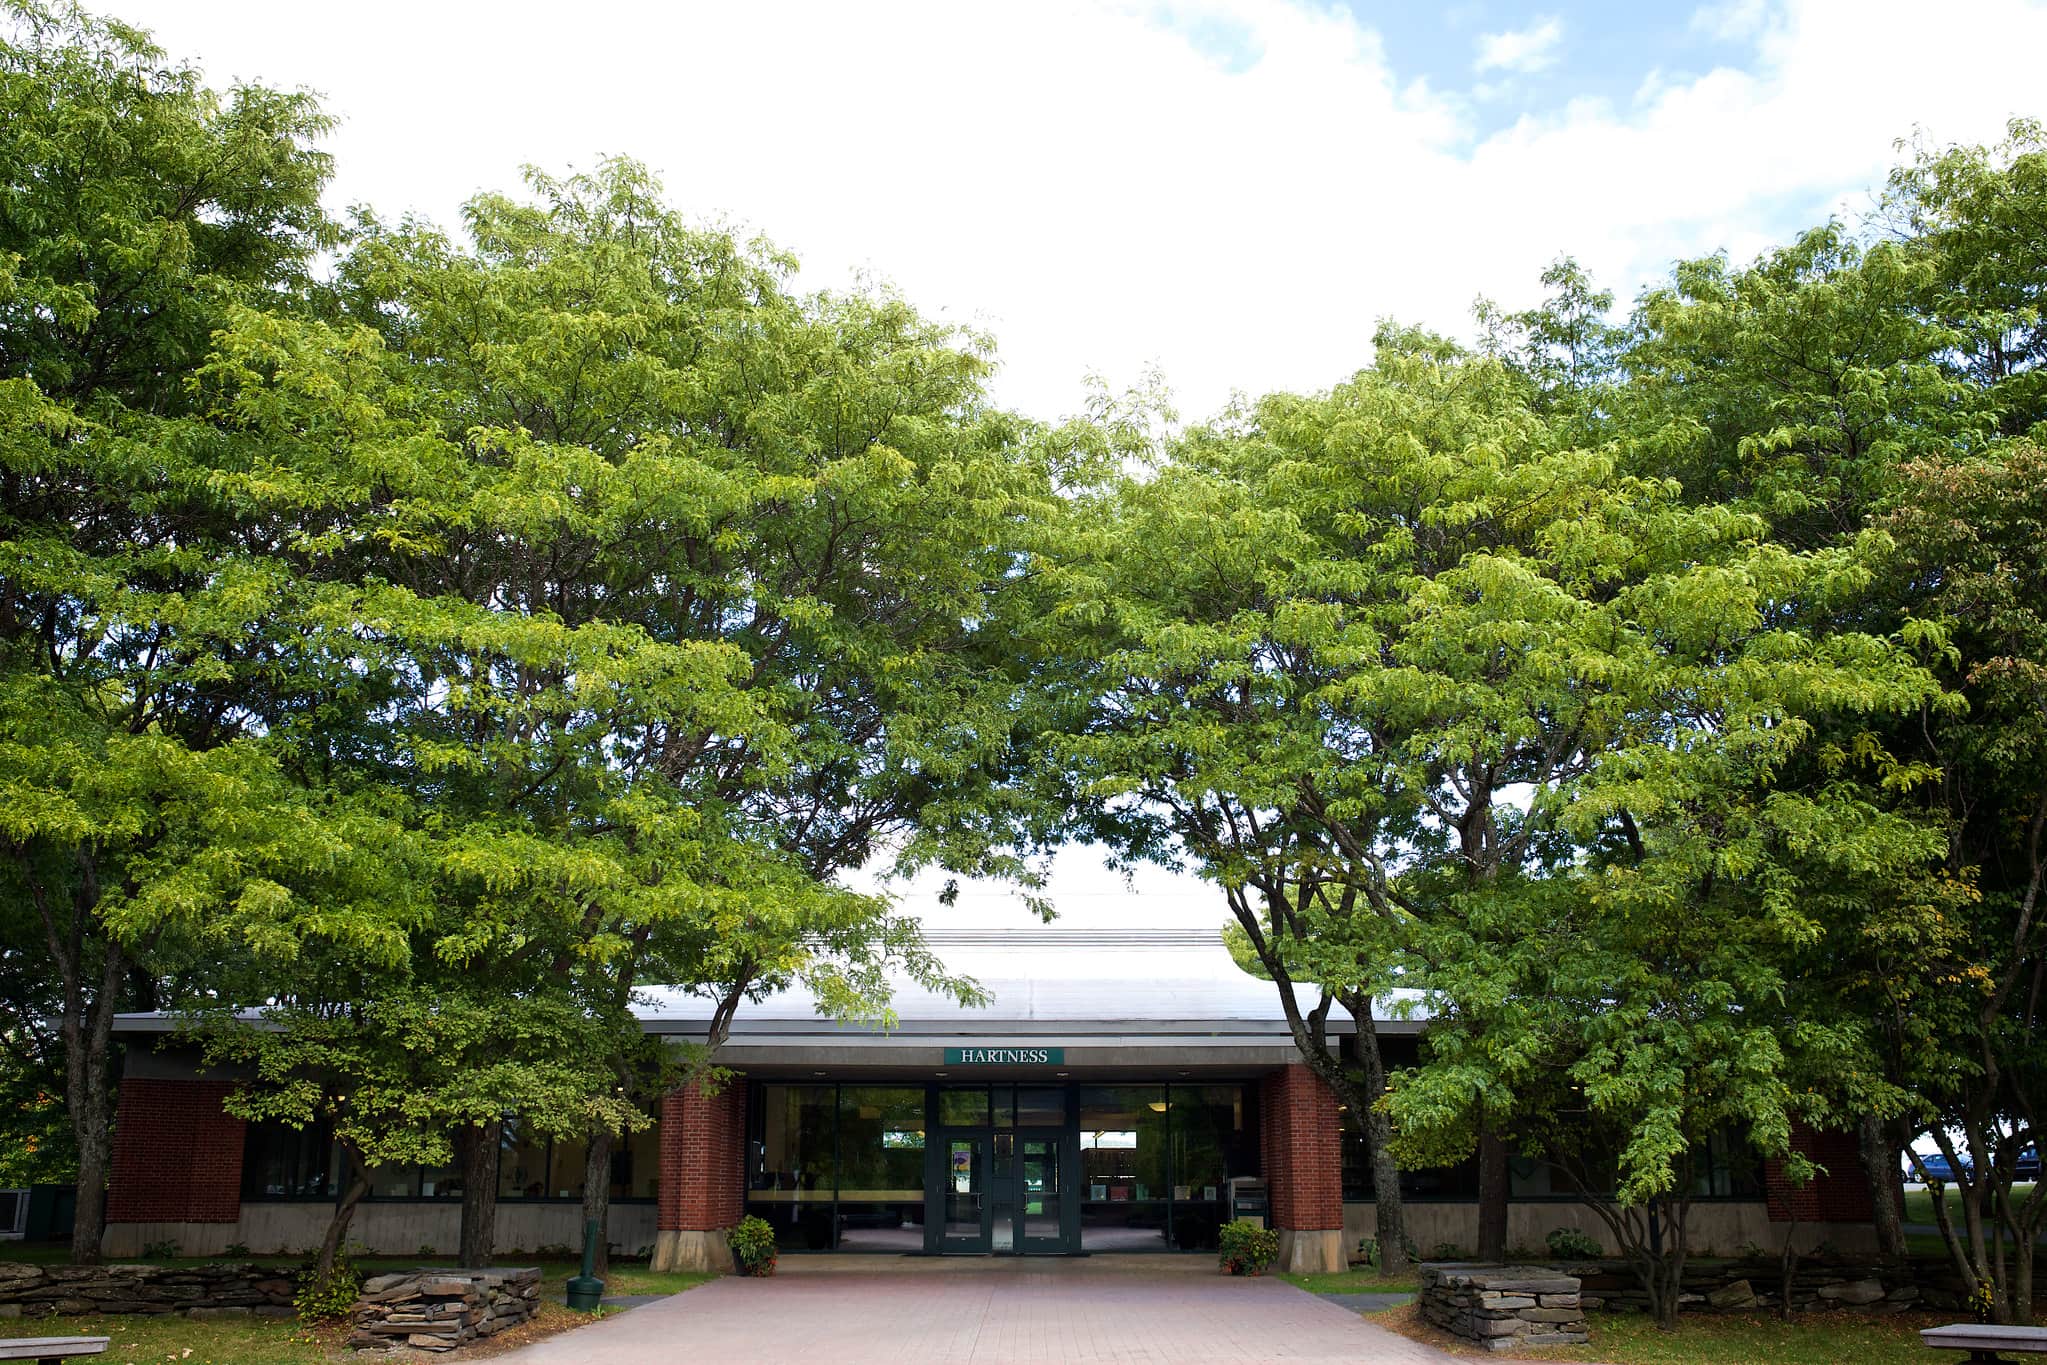 A building that says Hartness Library with green bushy trees framing the entrance.